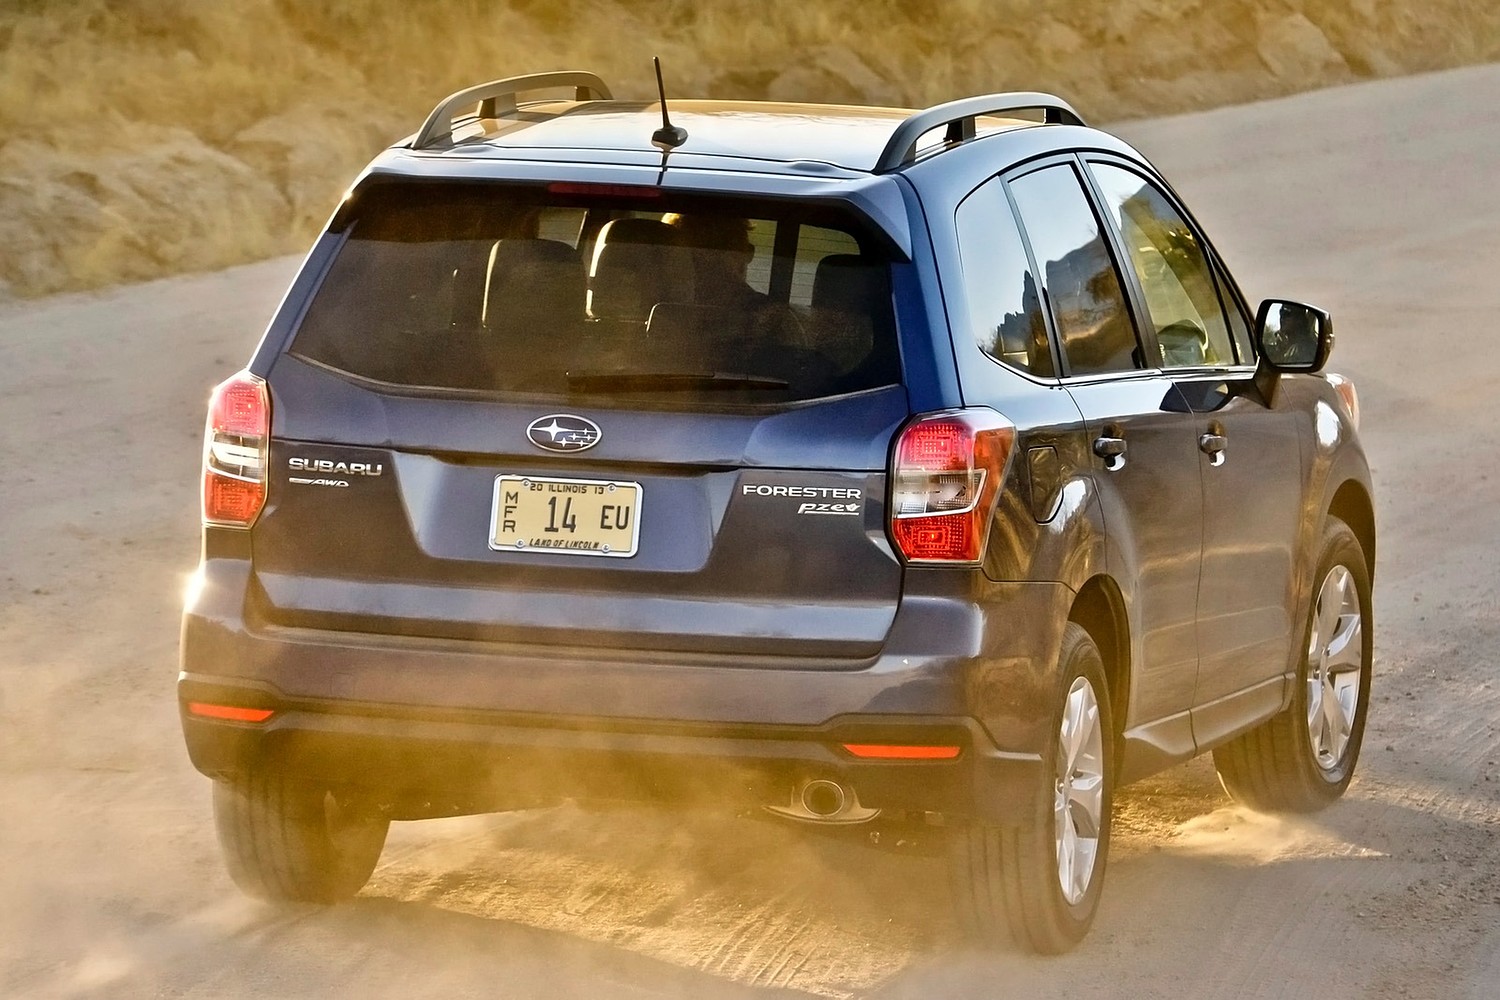 Subaru Forester 2.5i Limited PZEV 4dr SUV Exterior Shown (2015 model year shown)